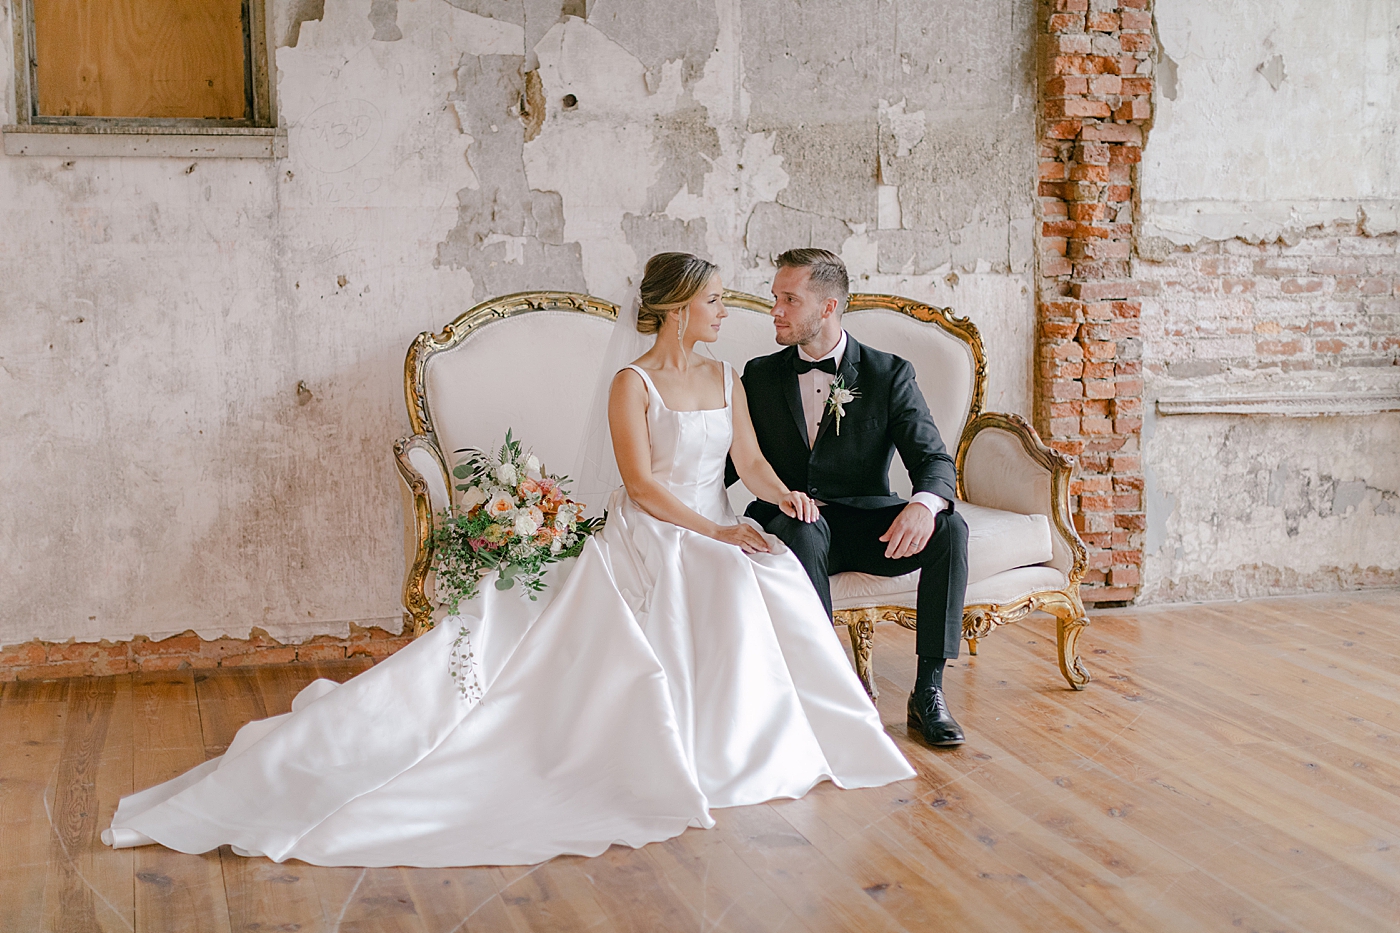 Bride and groom sitting on a sofa | Photo by Hope Helmuth Photography